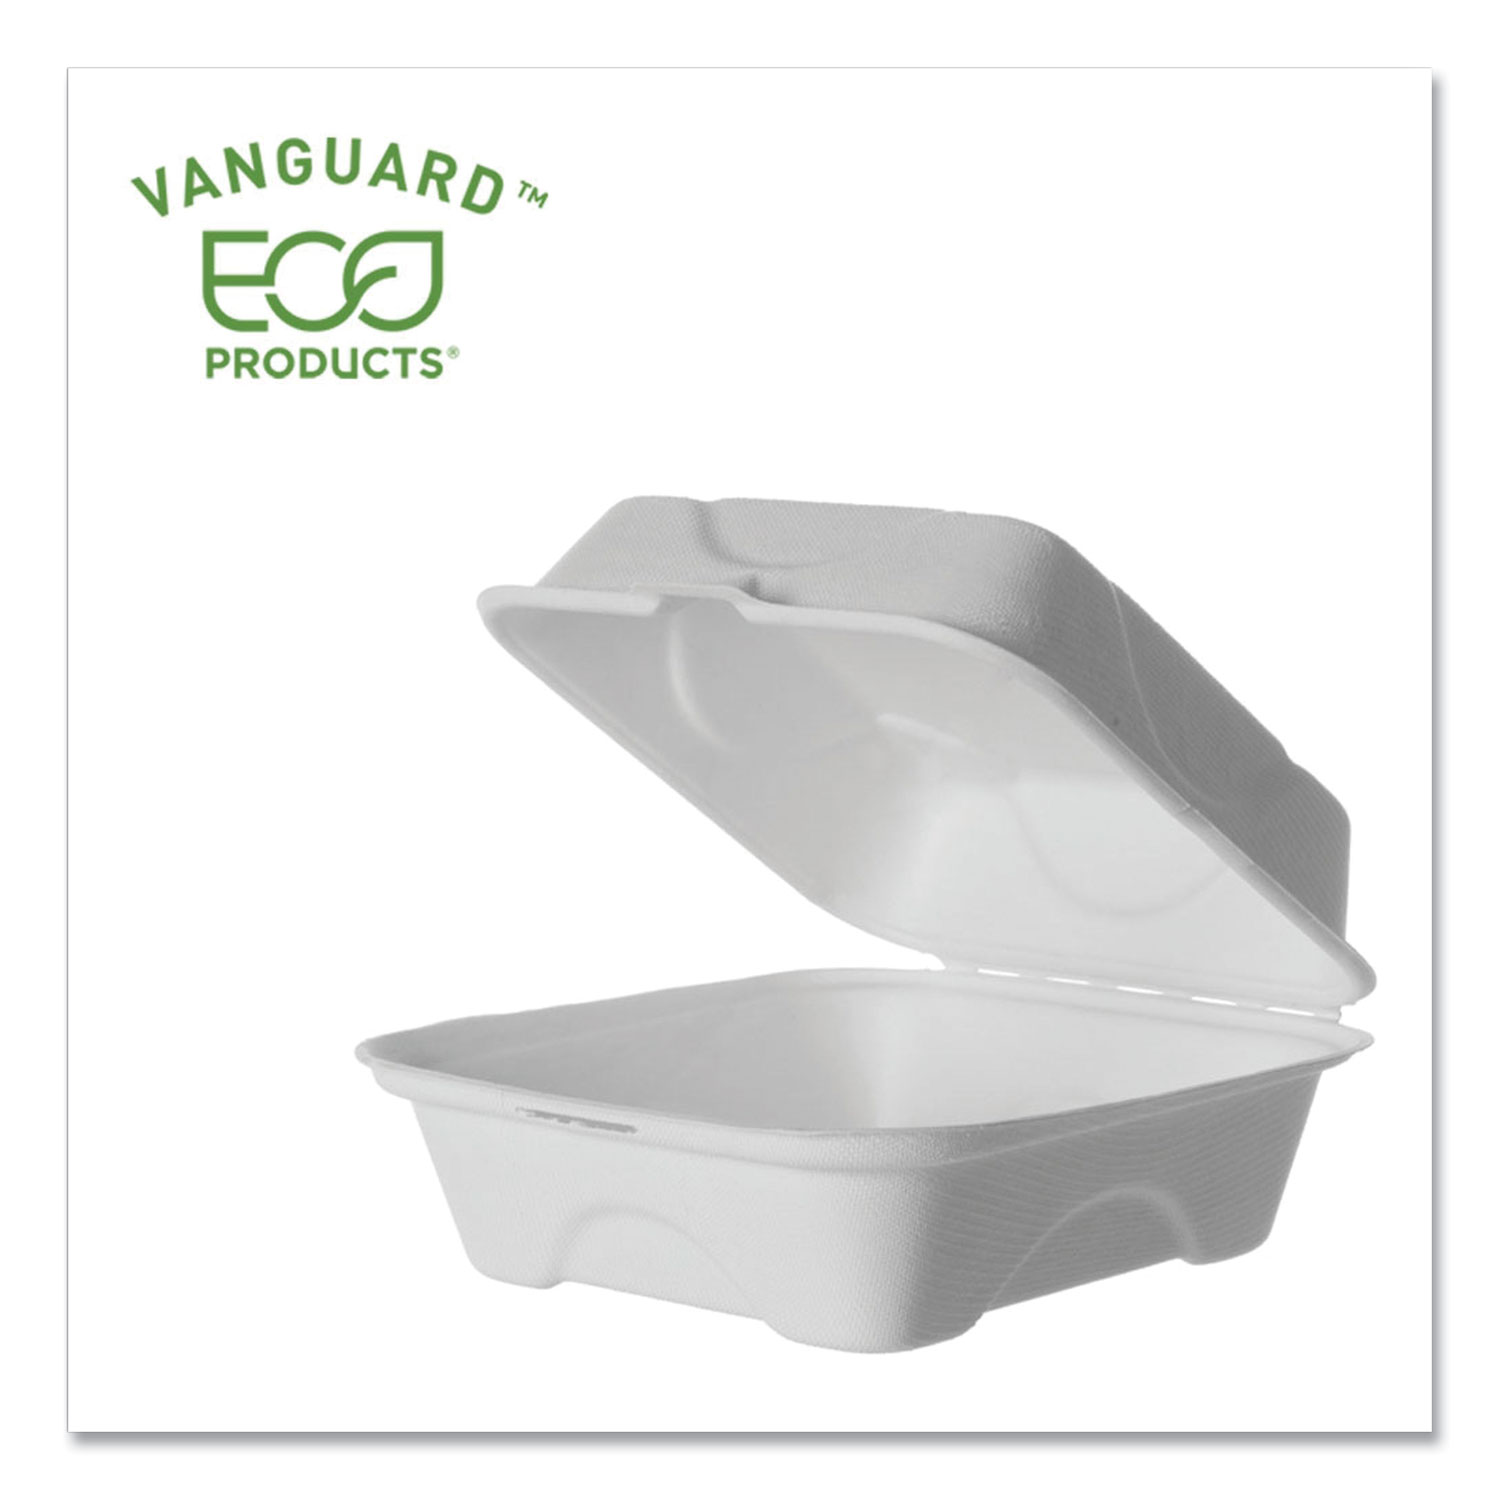  Eco-Products EP-HC6NFA Vanguard Renewable and Compostable Sugarcane Clamshells, 1-Compartment, 6 x 6 x 3, White, 500/Carton (ECOEPHC6NFA) 